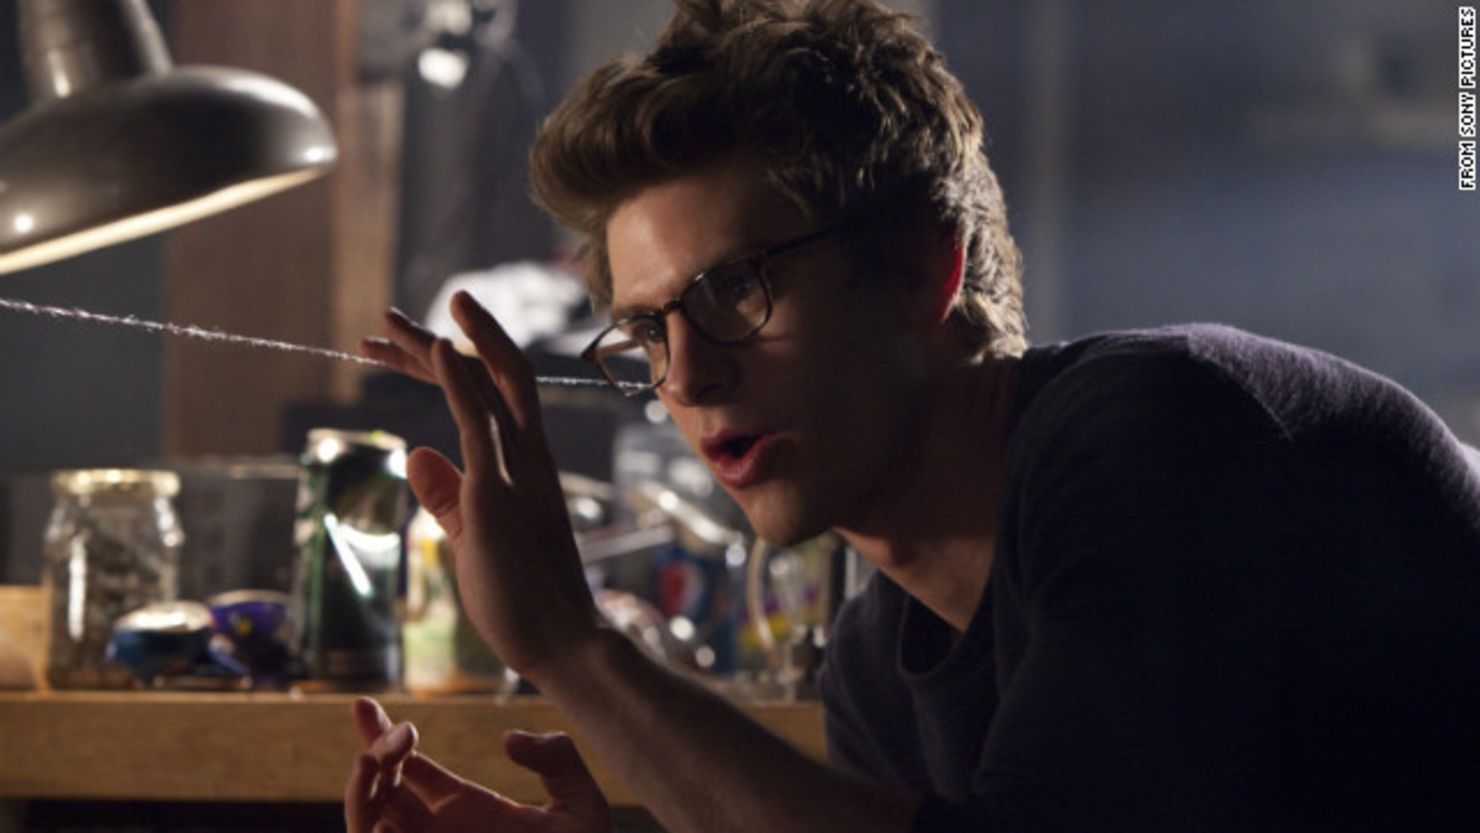 Can you tell whether Peter Parker, as played by Andrew Garfield,  is a nerd?